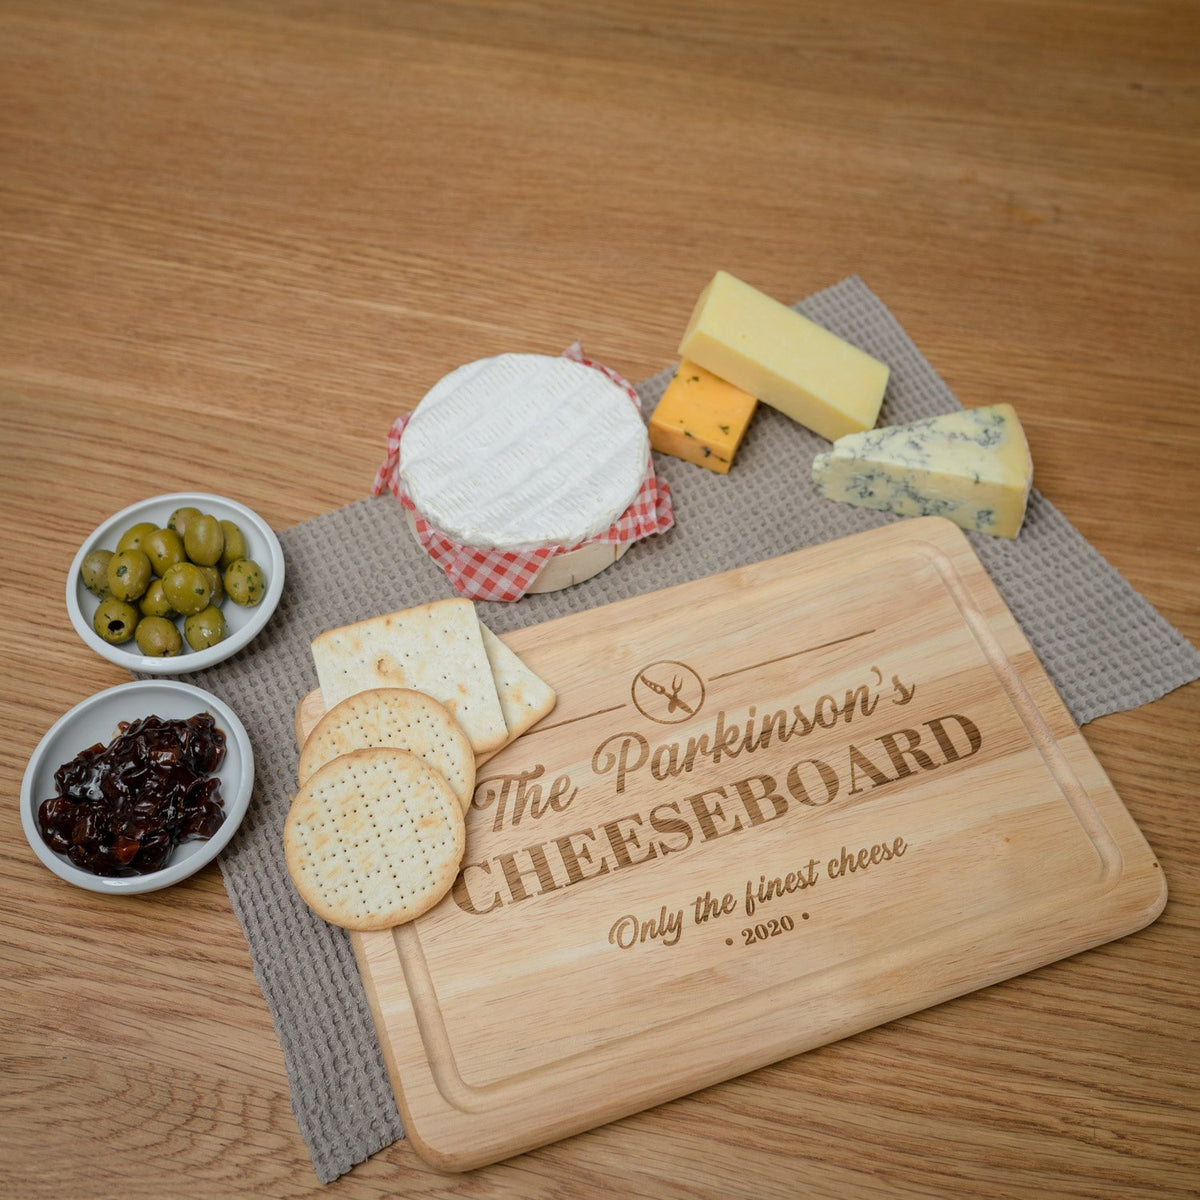 The Family Cheeseboard